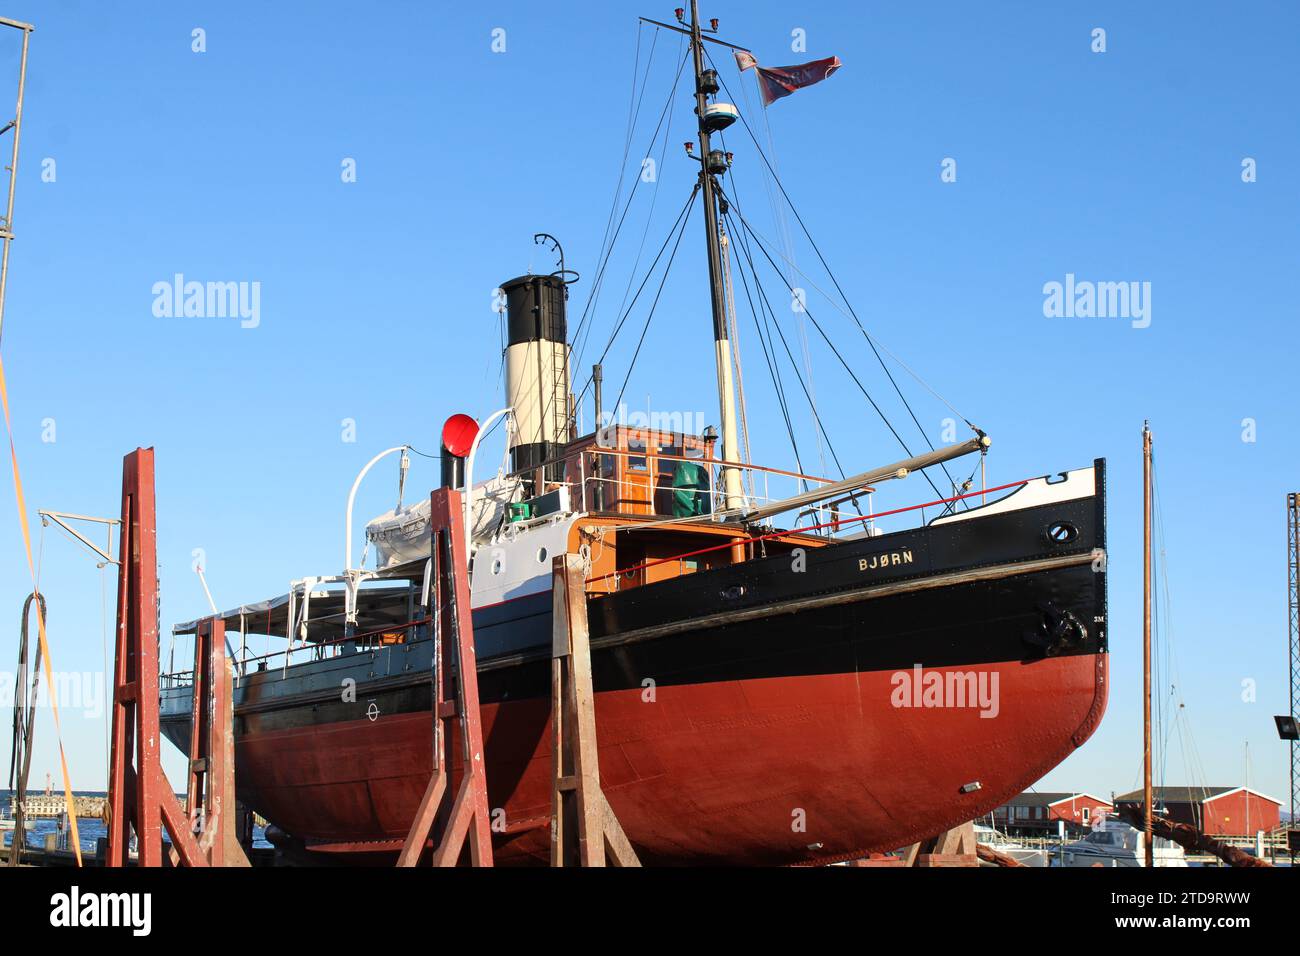 S/S Bjorn built in 1908, combined tugboat and icebreaker out of the water for restoration in Gilleleje Harbour, Denmark Stock Photo